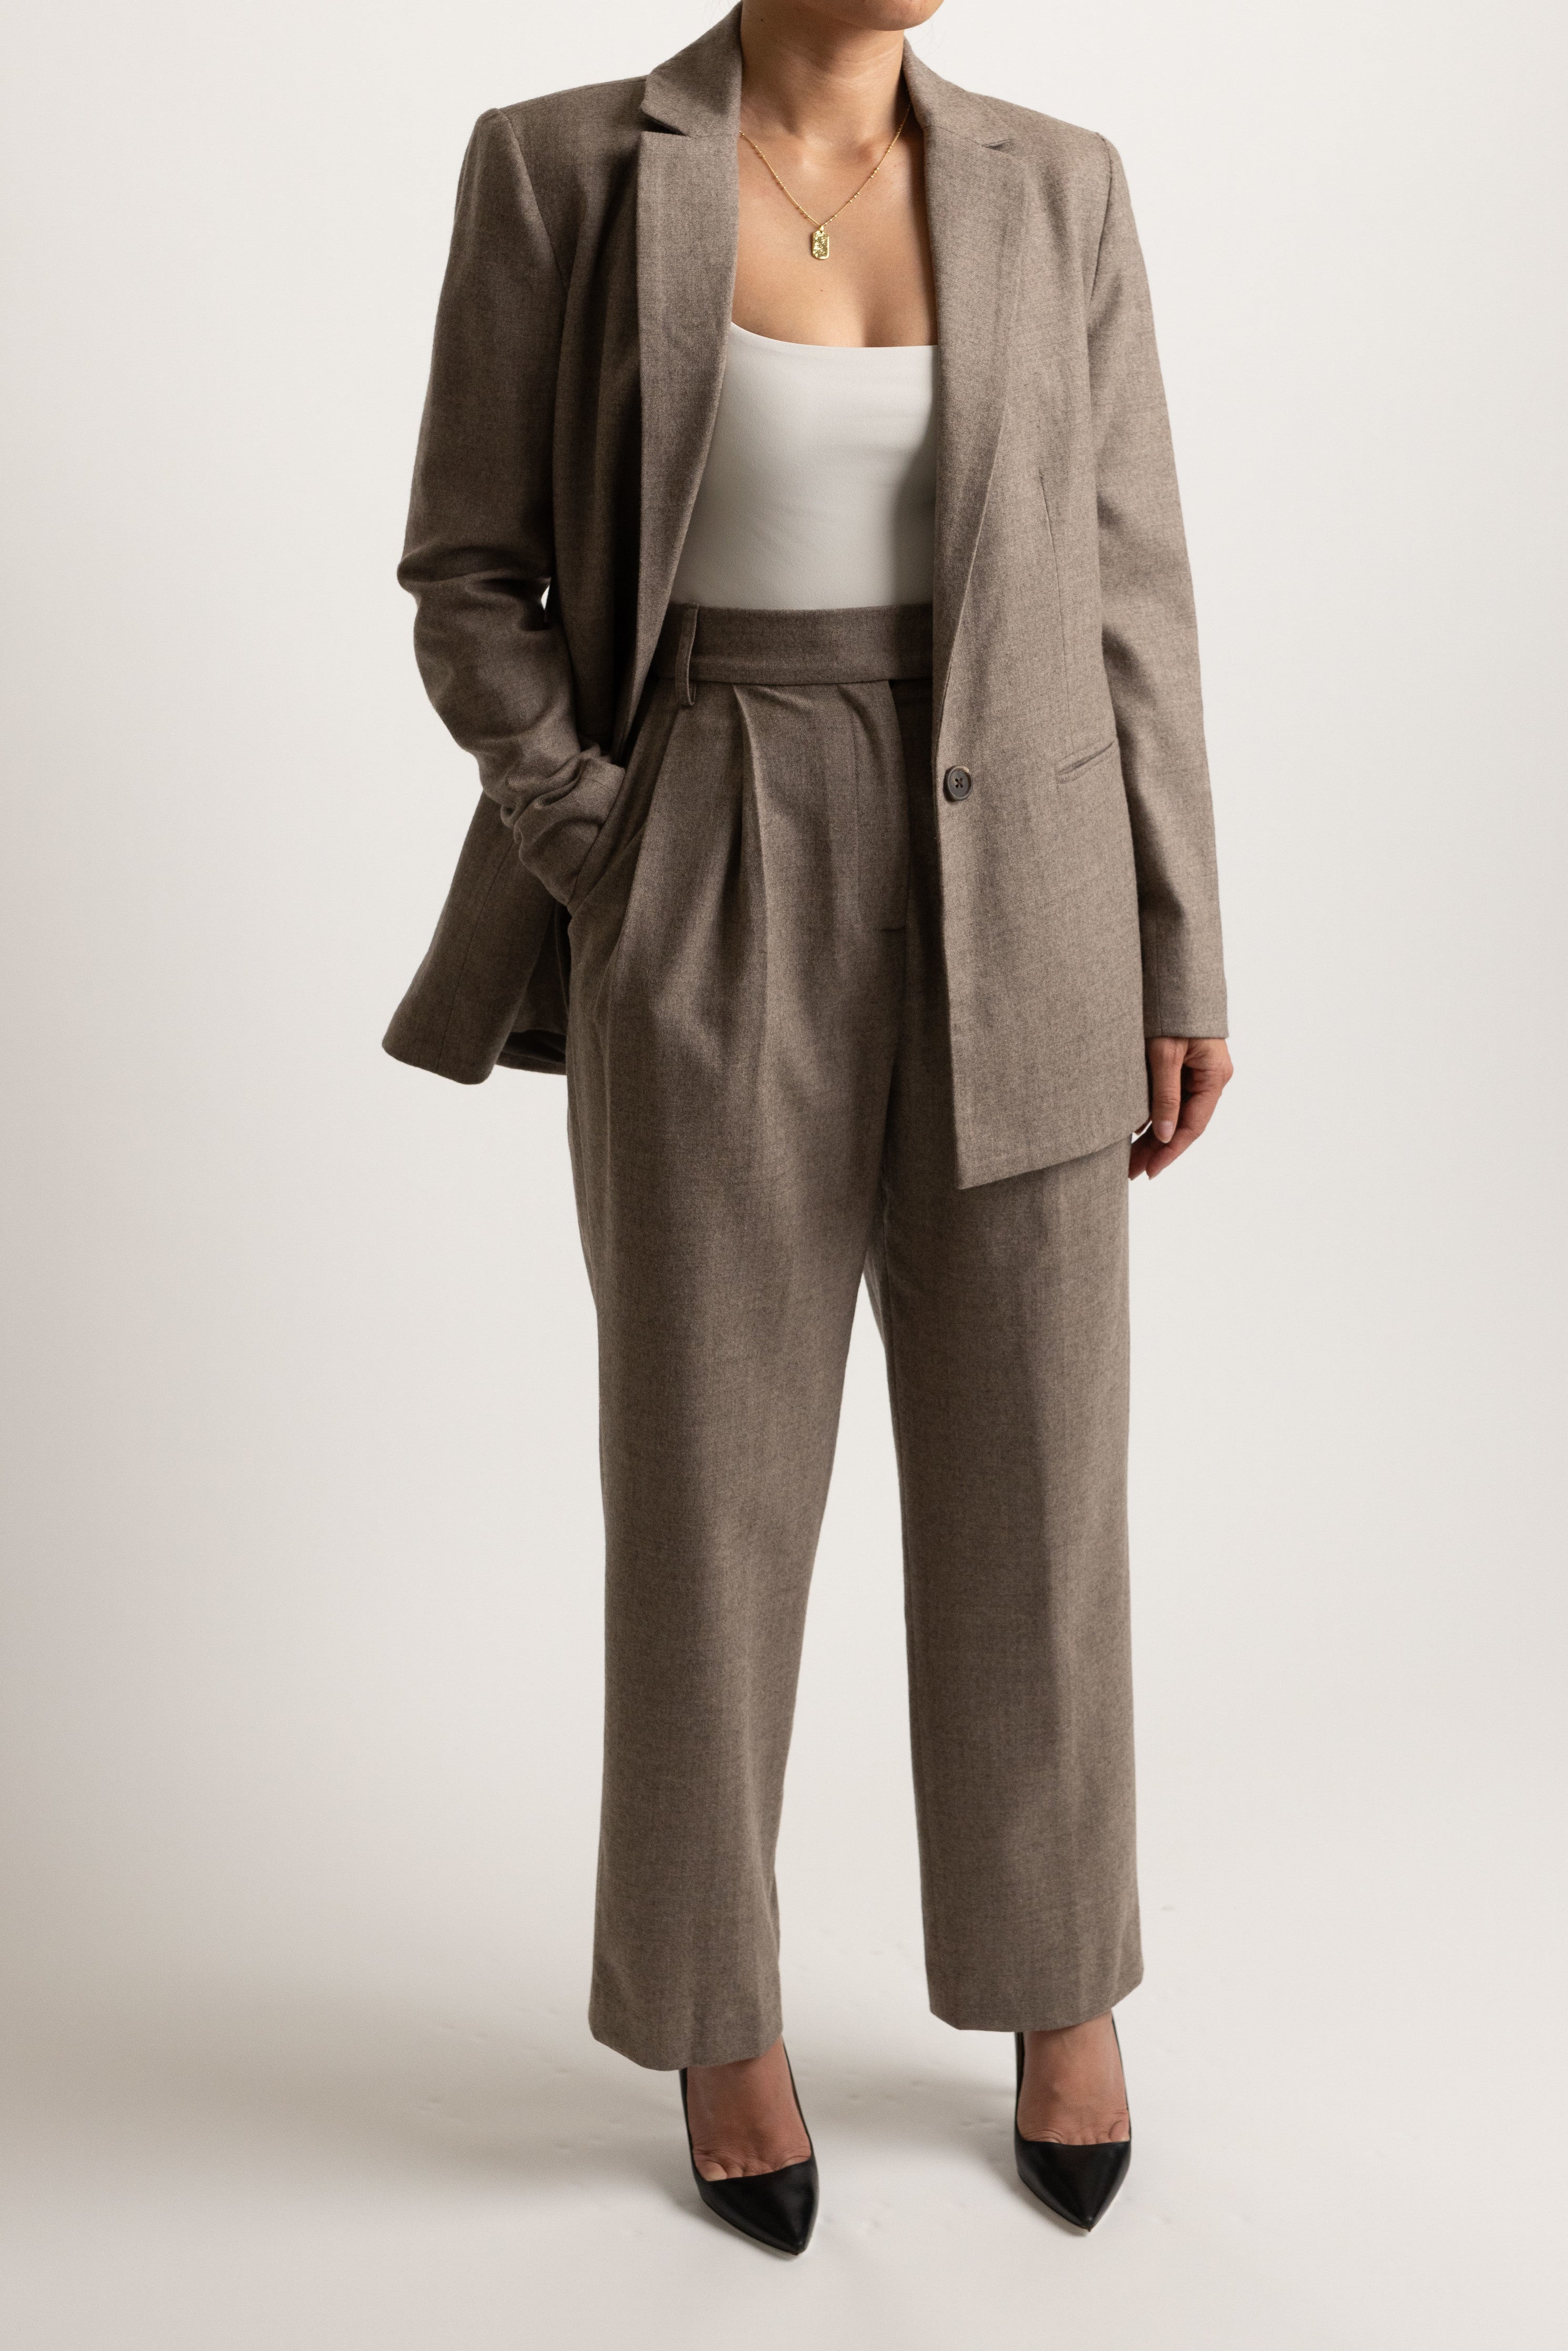 Trial Trouser in Coffee - front view worn with matching Court Jacket 